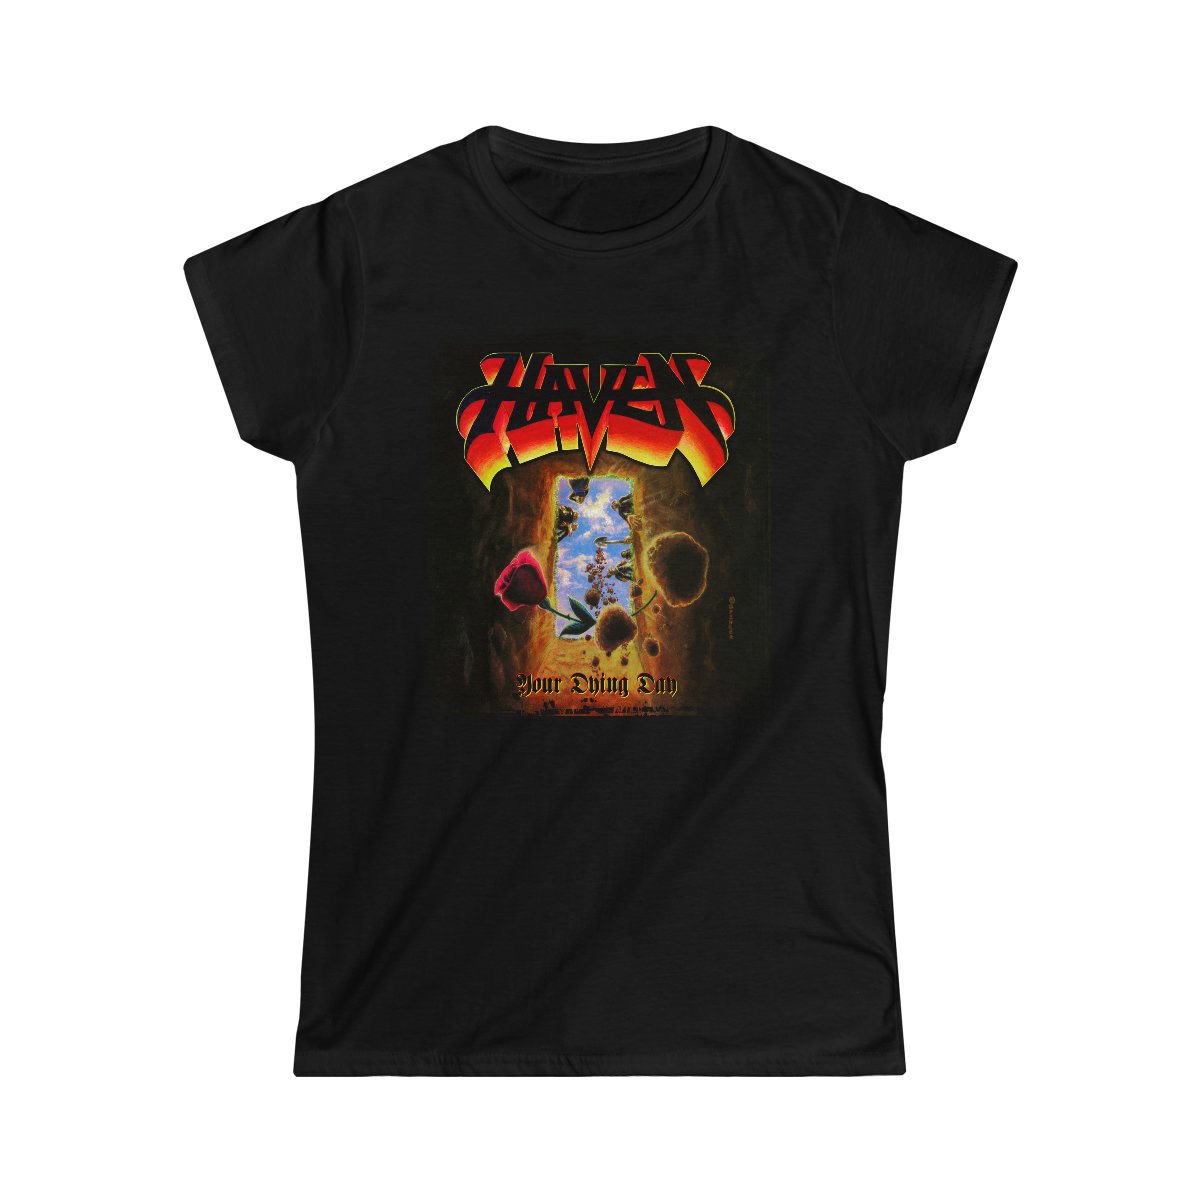 Haven – Your Dying Day Women’s Short Sleeve Tshirt 64000L